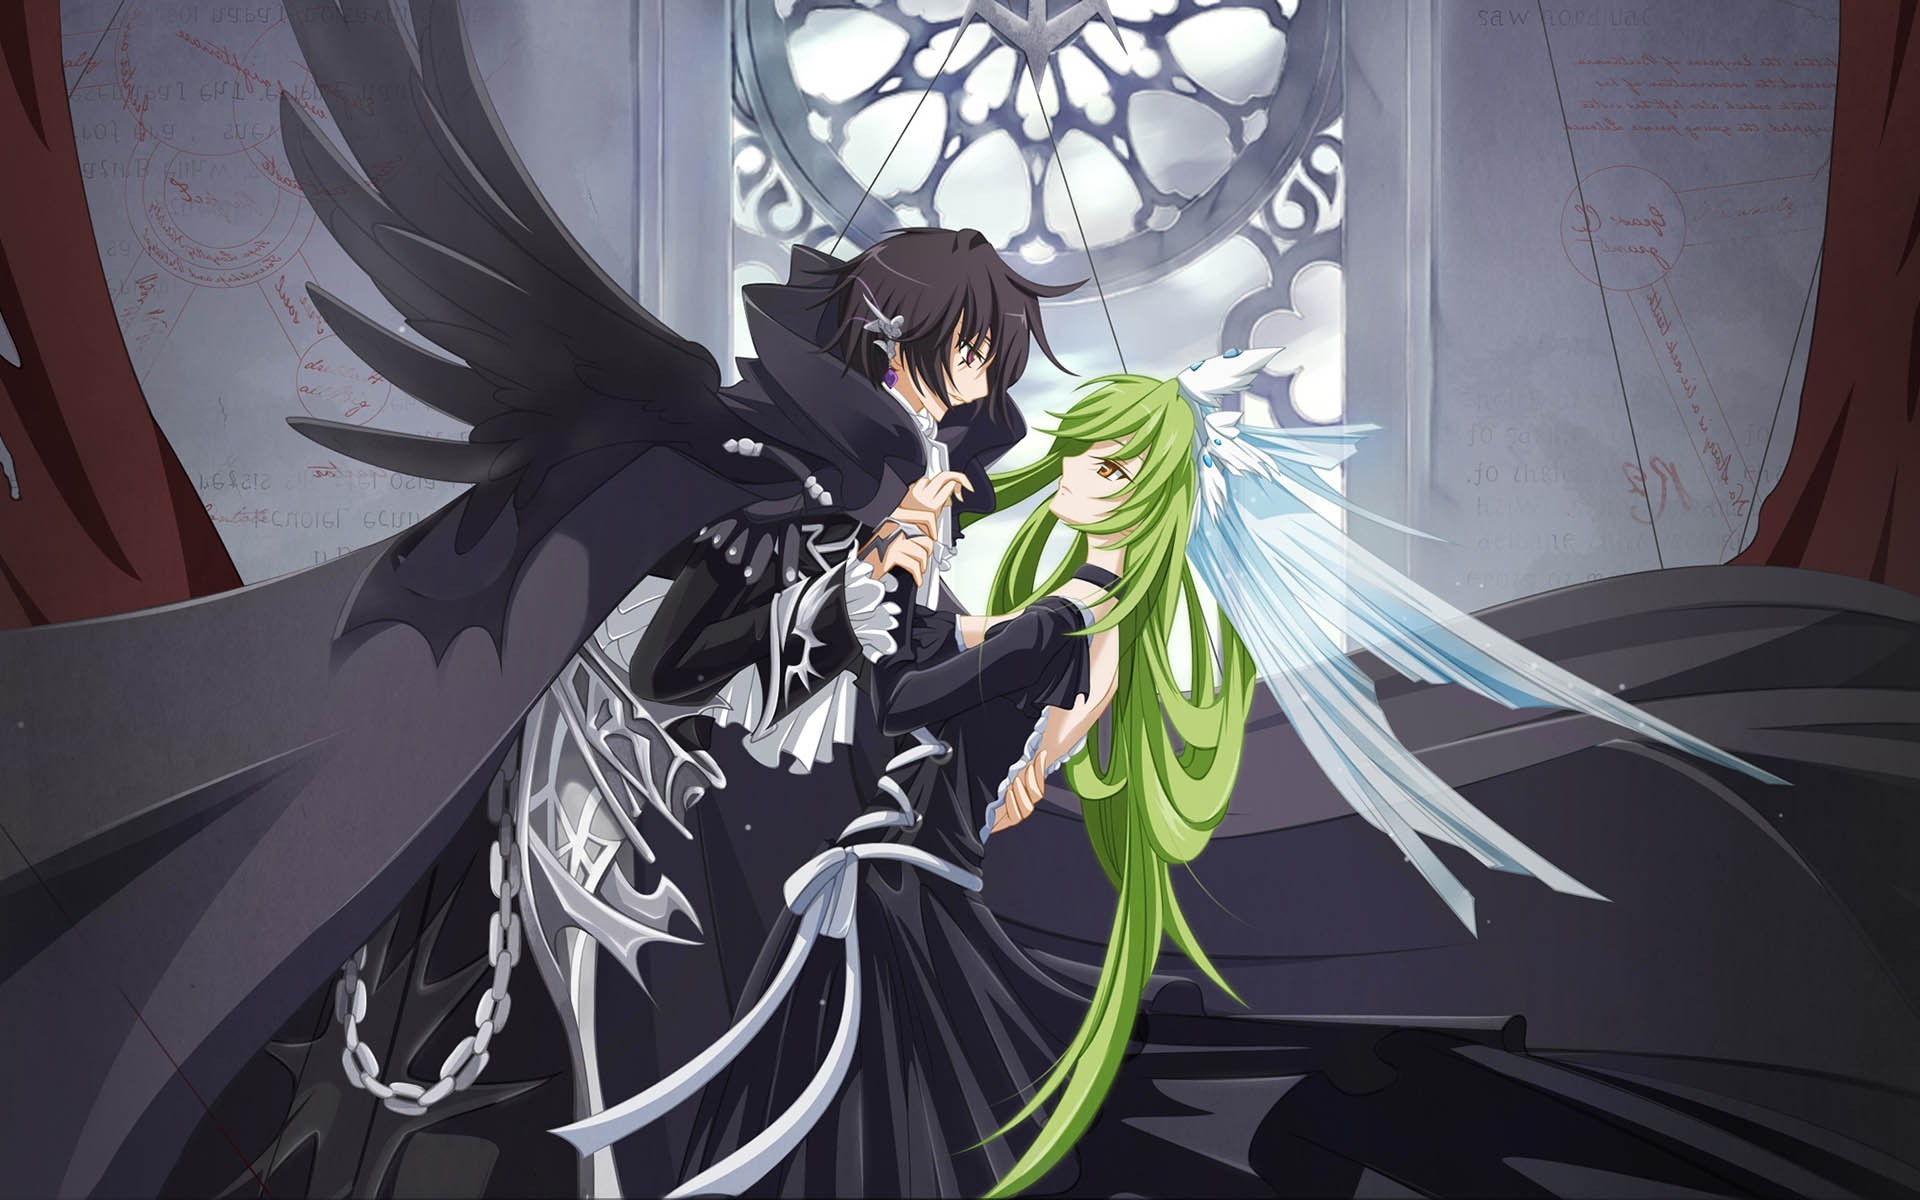 Download Lelouch Lamperouge and CC   Code Geass wallpaper